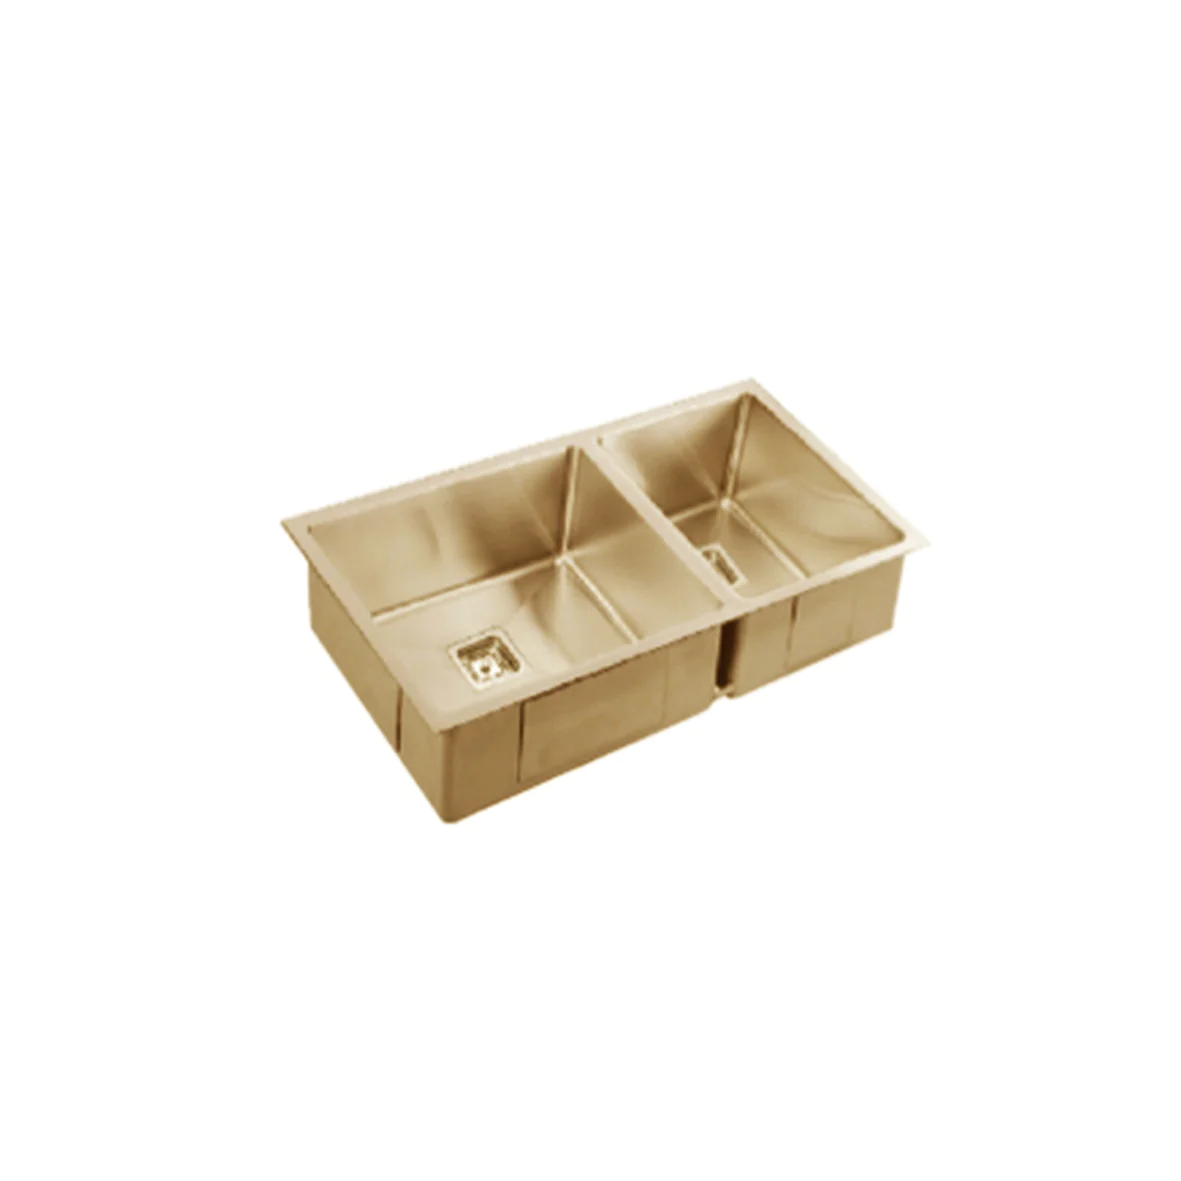 VEROTTI INOX 1 1/2 BOWL UNIVERSAL STAINLESS STEEL KITCHEN SINK BRUSHED BRASS 670MM (AVAILABLE IN LEFT OR RIGHT CONFIGURATION)